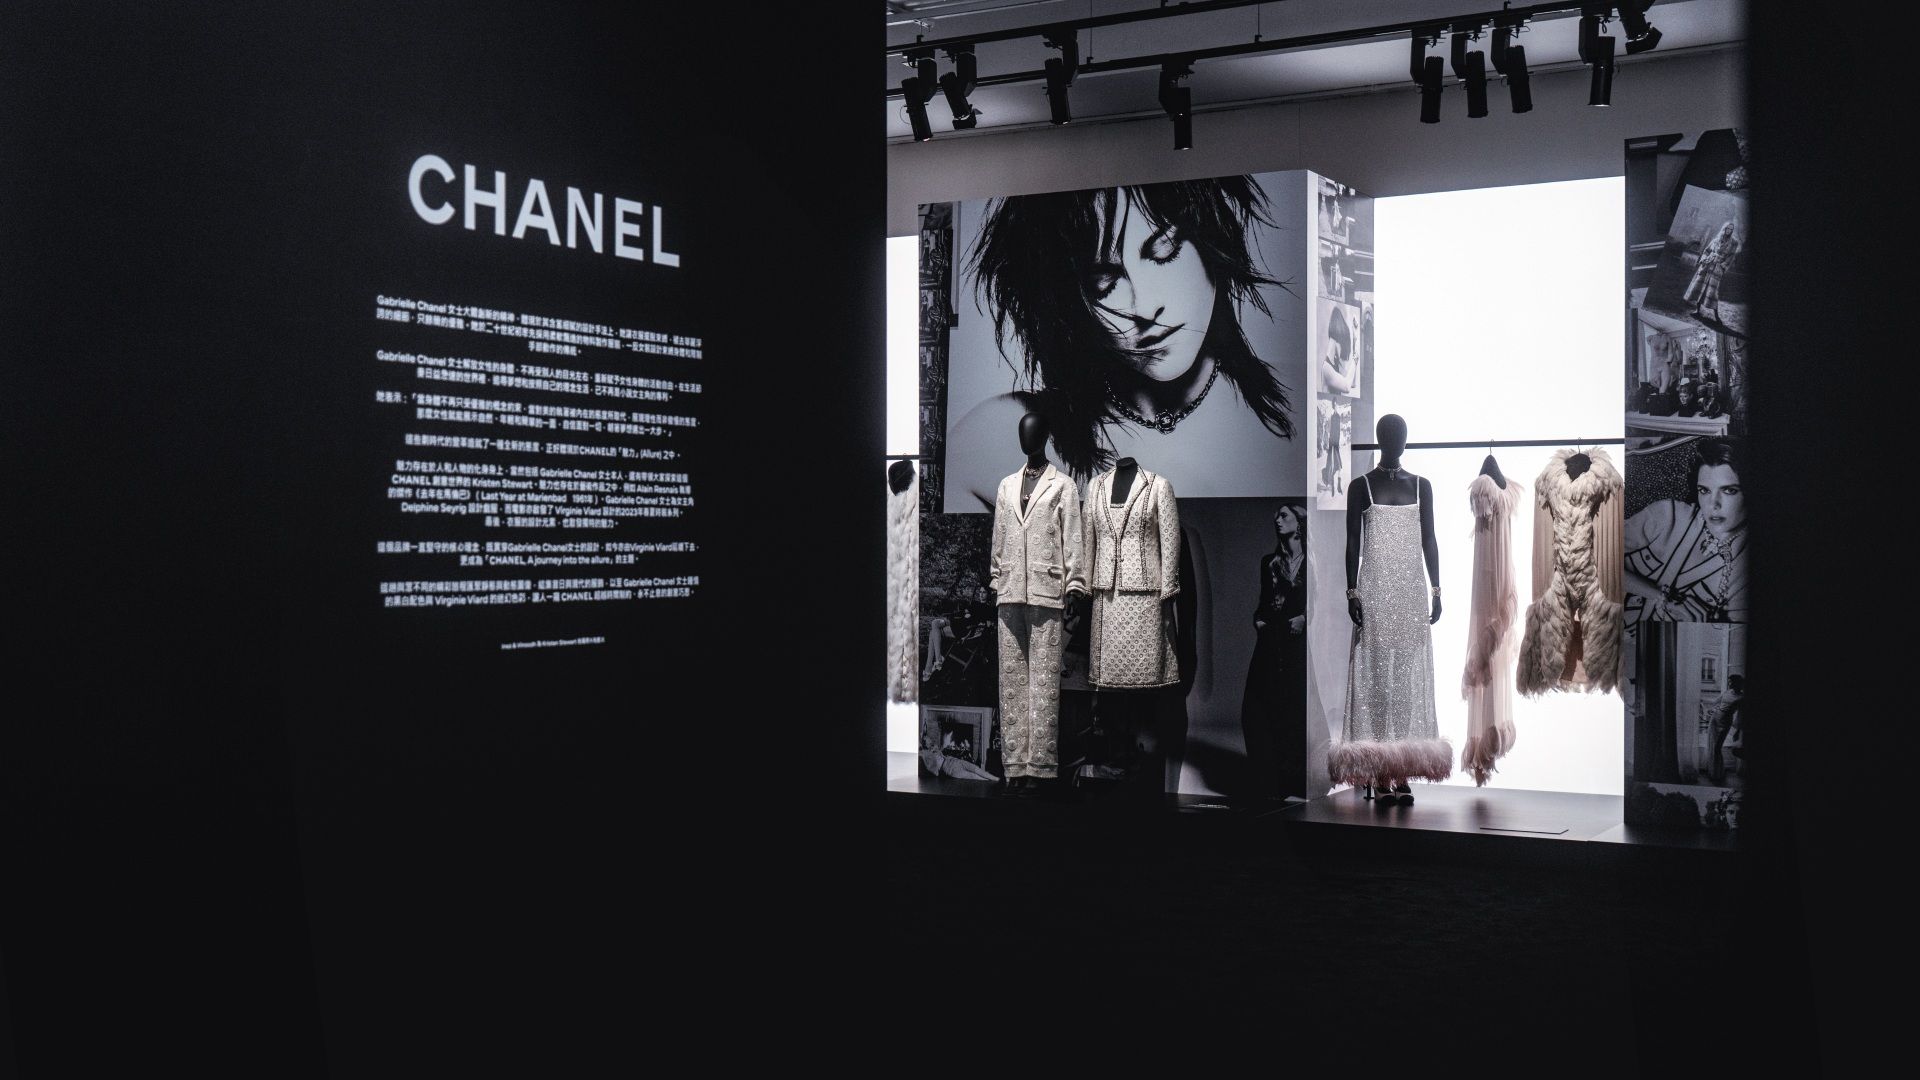 Into the Allure: Chanel explores the links in its own fashion heritage